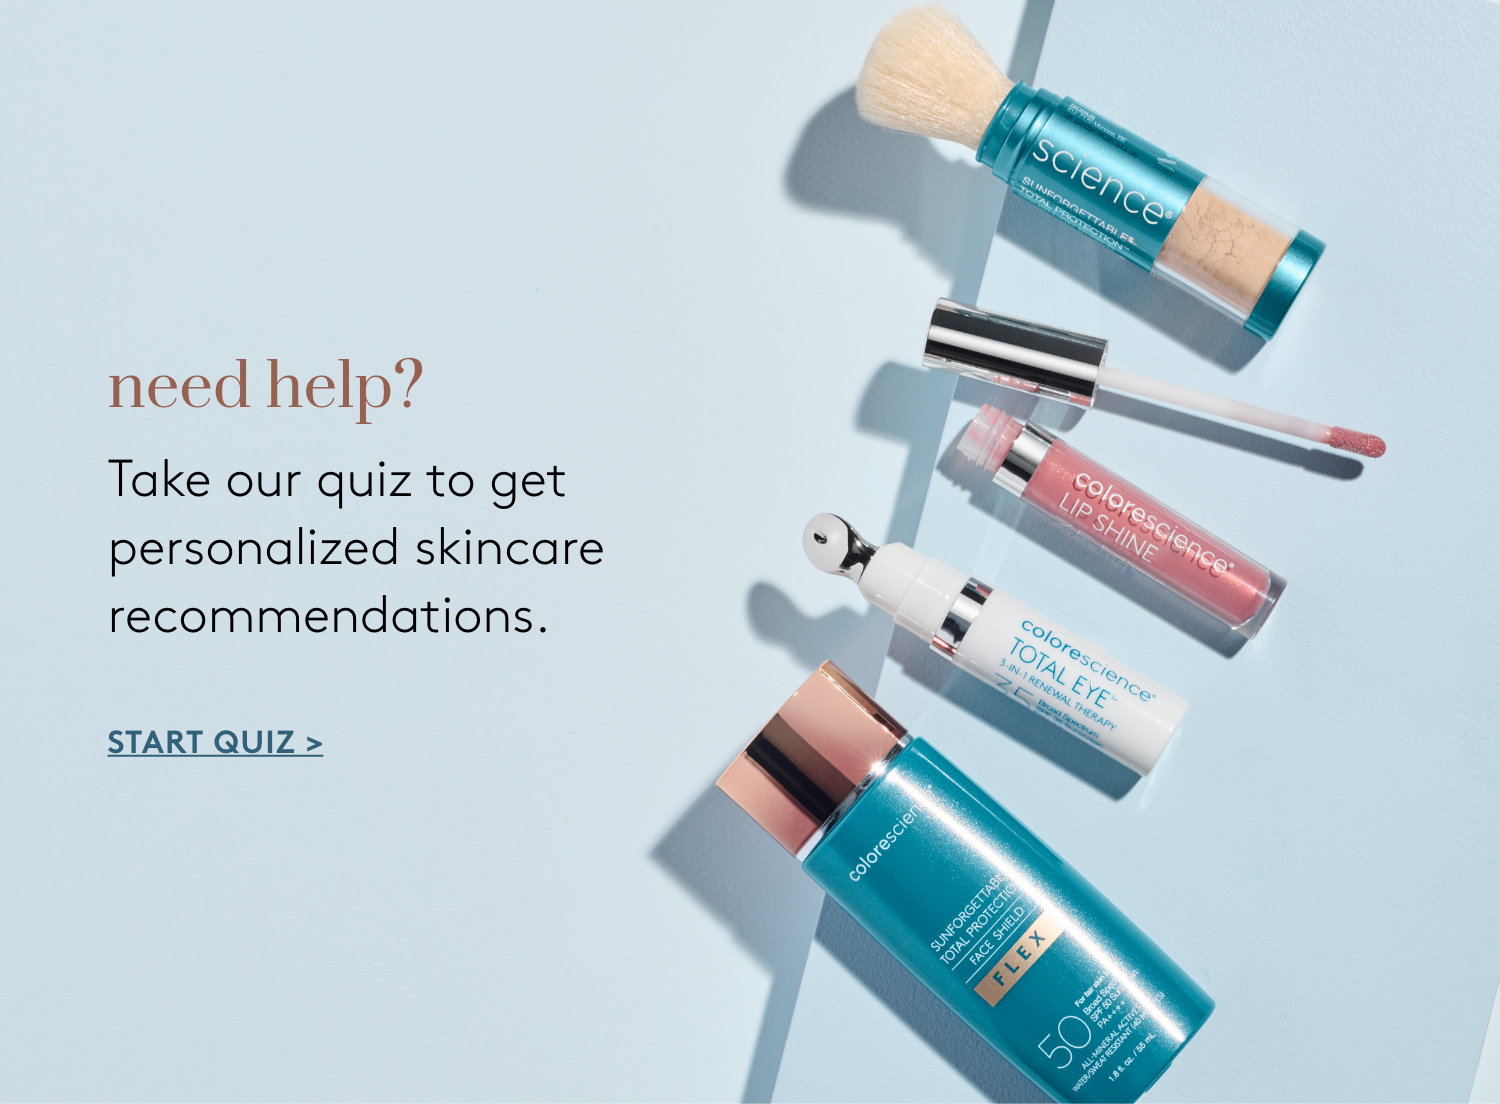 Need help? Take our quiz to get personalized skincare recommendations.